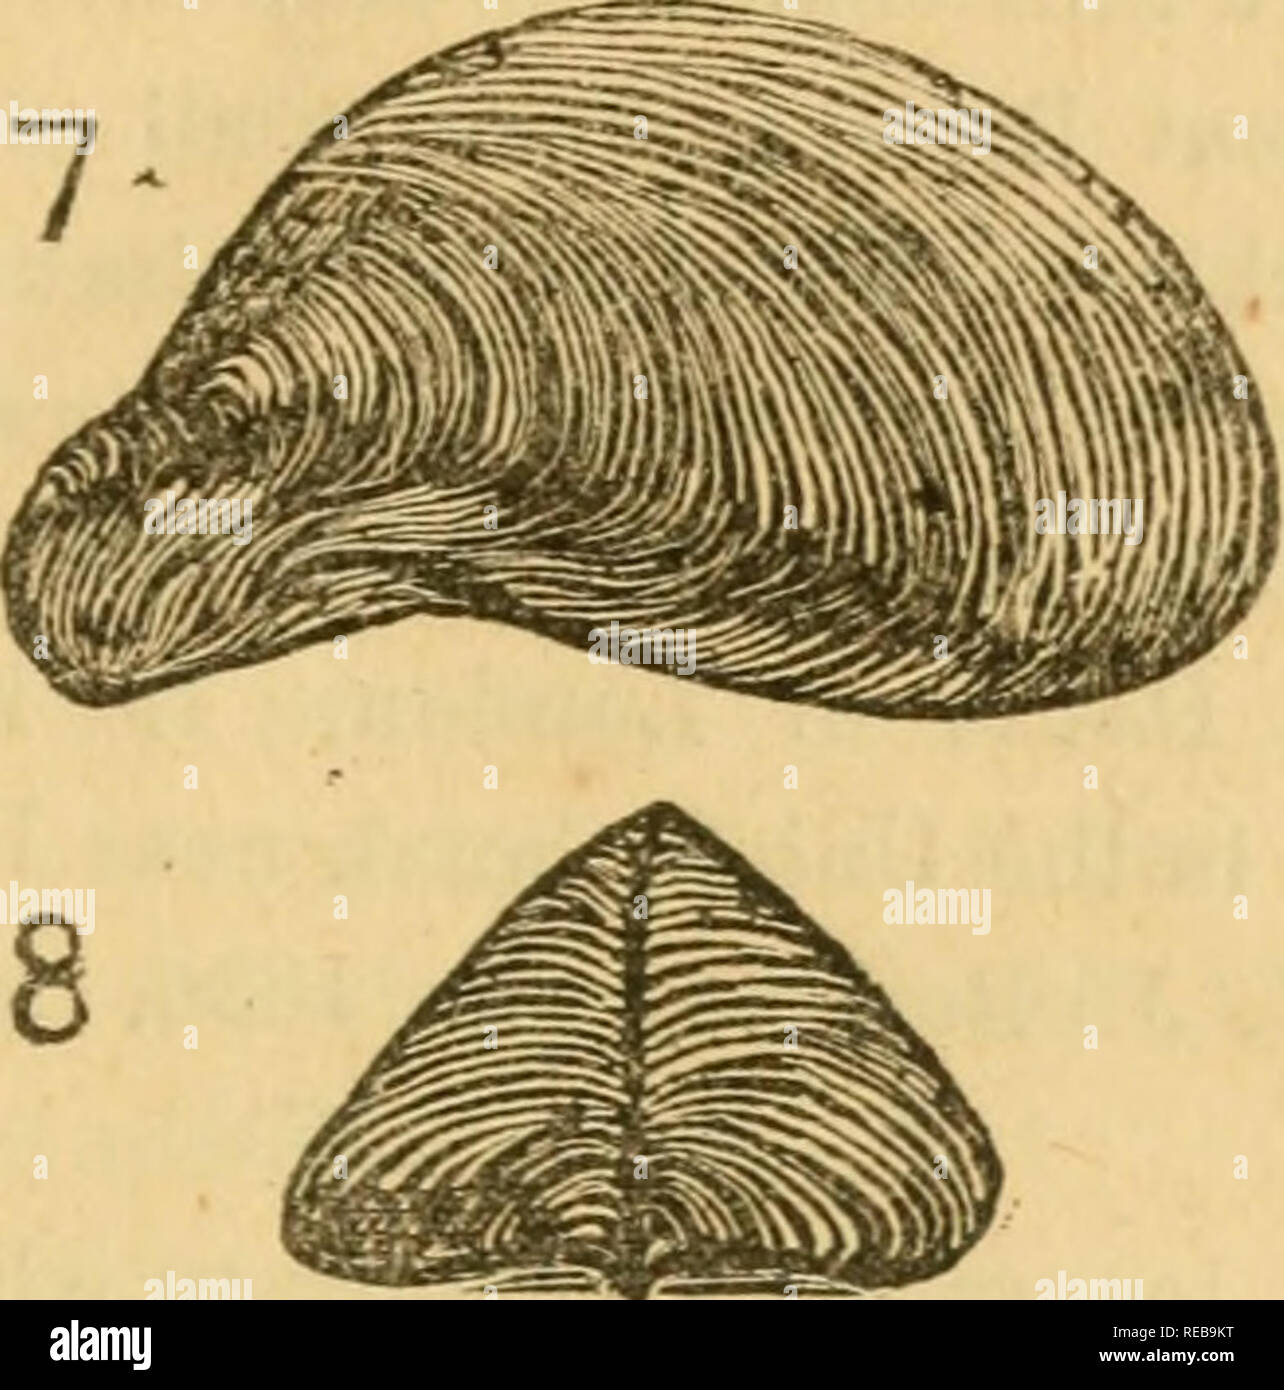 . The conchology of Nottingham; or, A popular history of the recent land and fresh water Mollusca found in the neighborhood;. Mollusks. 17 Dreissena polimorpha (The Zebra Dreissenai). Pallas. Figures 7 and 8.. The form of this shell bears a striking resemblance io ihe common sea-mussel; its shape, however, varies considerably in the length and breadth, some specimens being much shorter and more ventricose than others. It also never attains the size of our marine species (Mytilus edulis). The colour of the shell is a greenish- brown, with chocolate zigzag markings (somewhat like the striping of Stock Photo